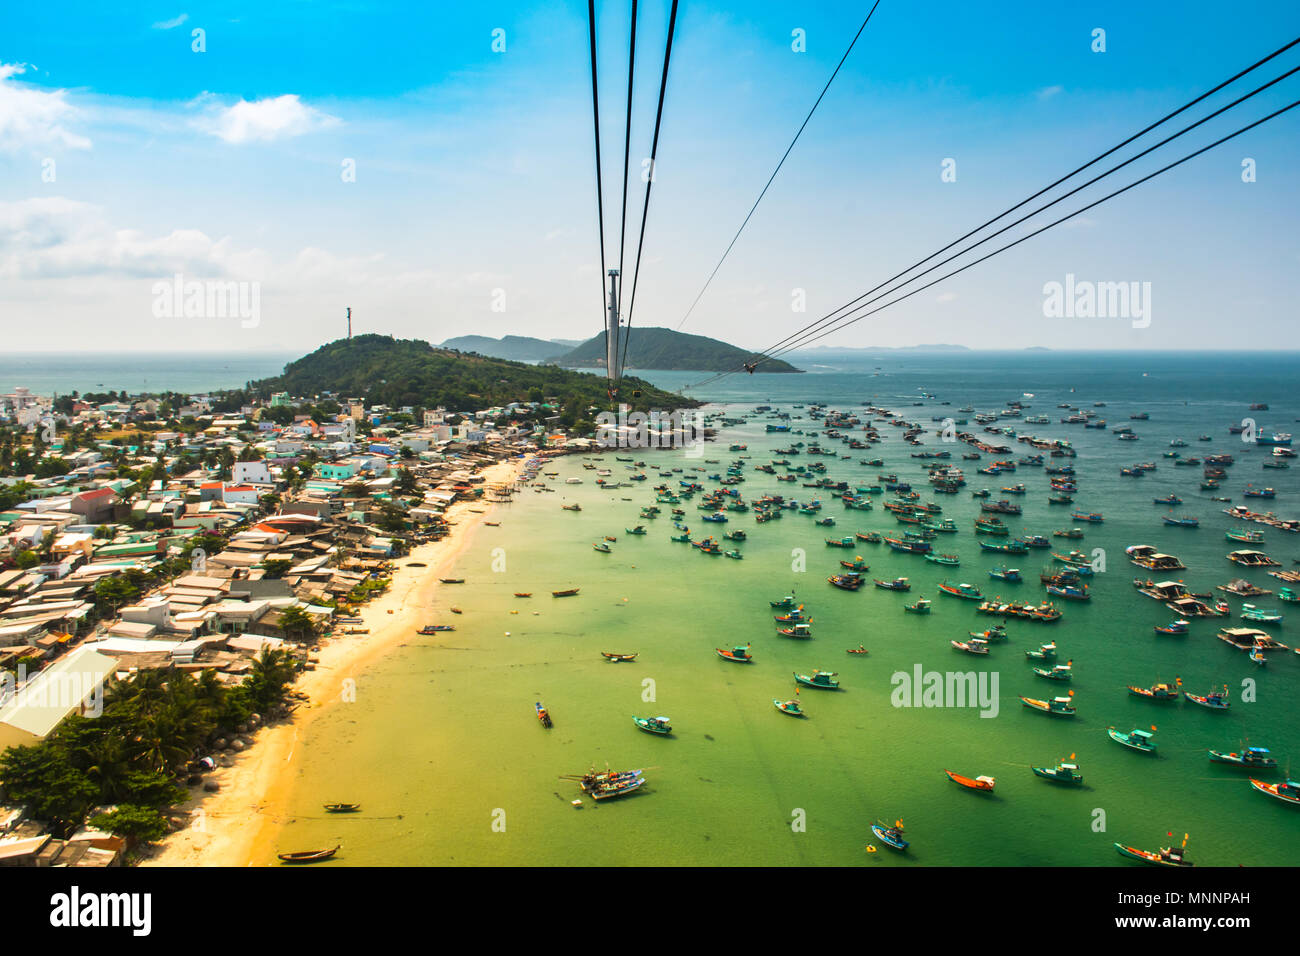 The Longest Cable Car situated on the Phu Quoc Island in South Vietnam  Stock Photo - Alamy